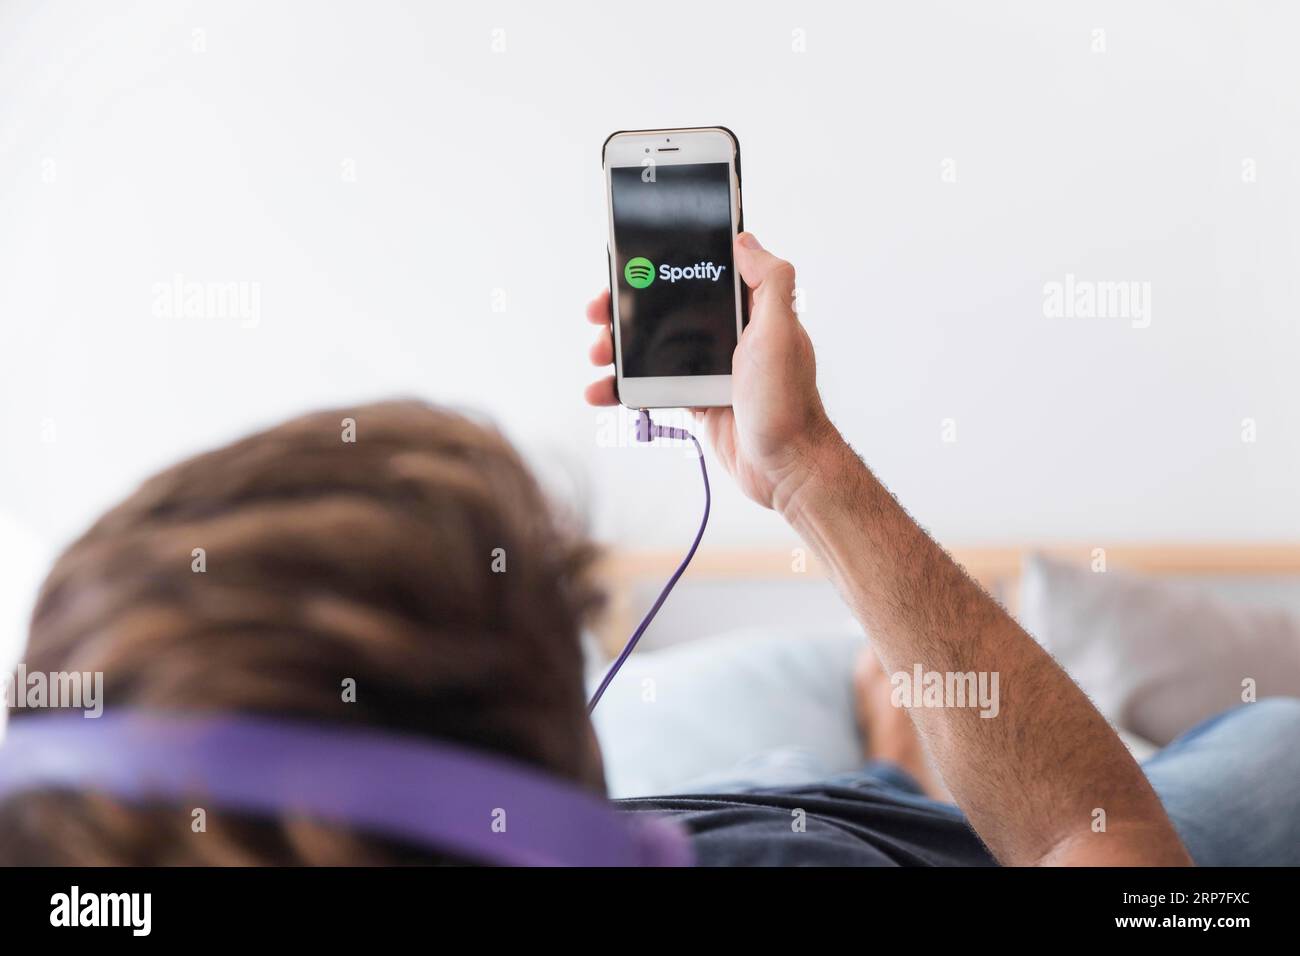 Young man holding smartphone with spotify app Stock Photo